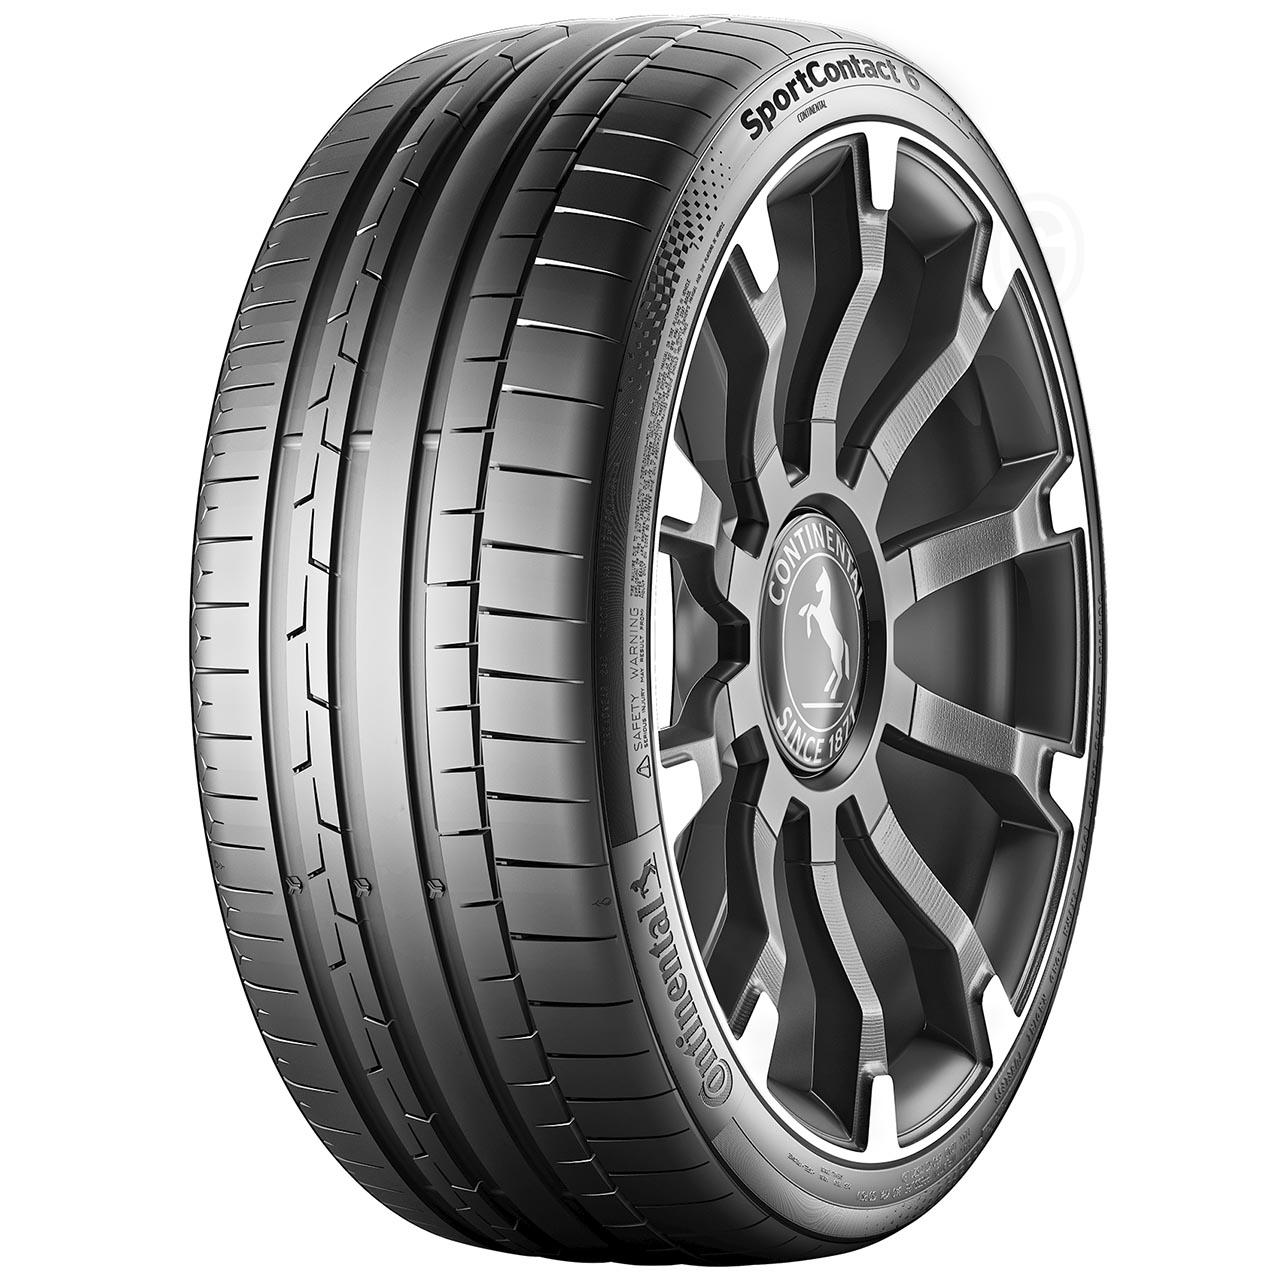 CONTINENTAL SPORTCONTACT 6 (MO1) 295/40ZR20 110(Y) FR